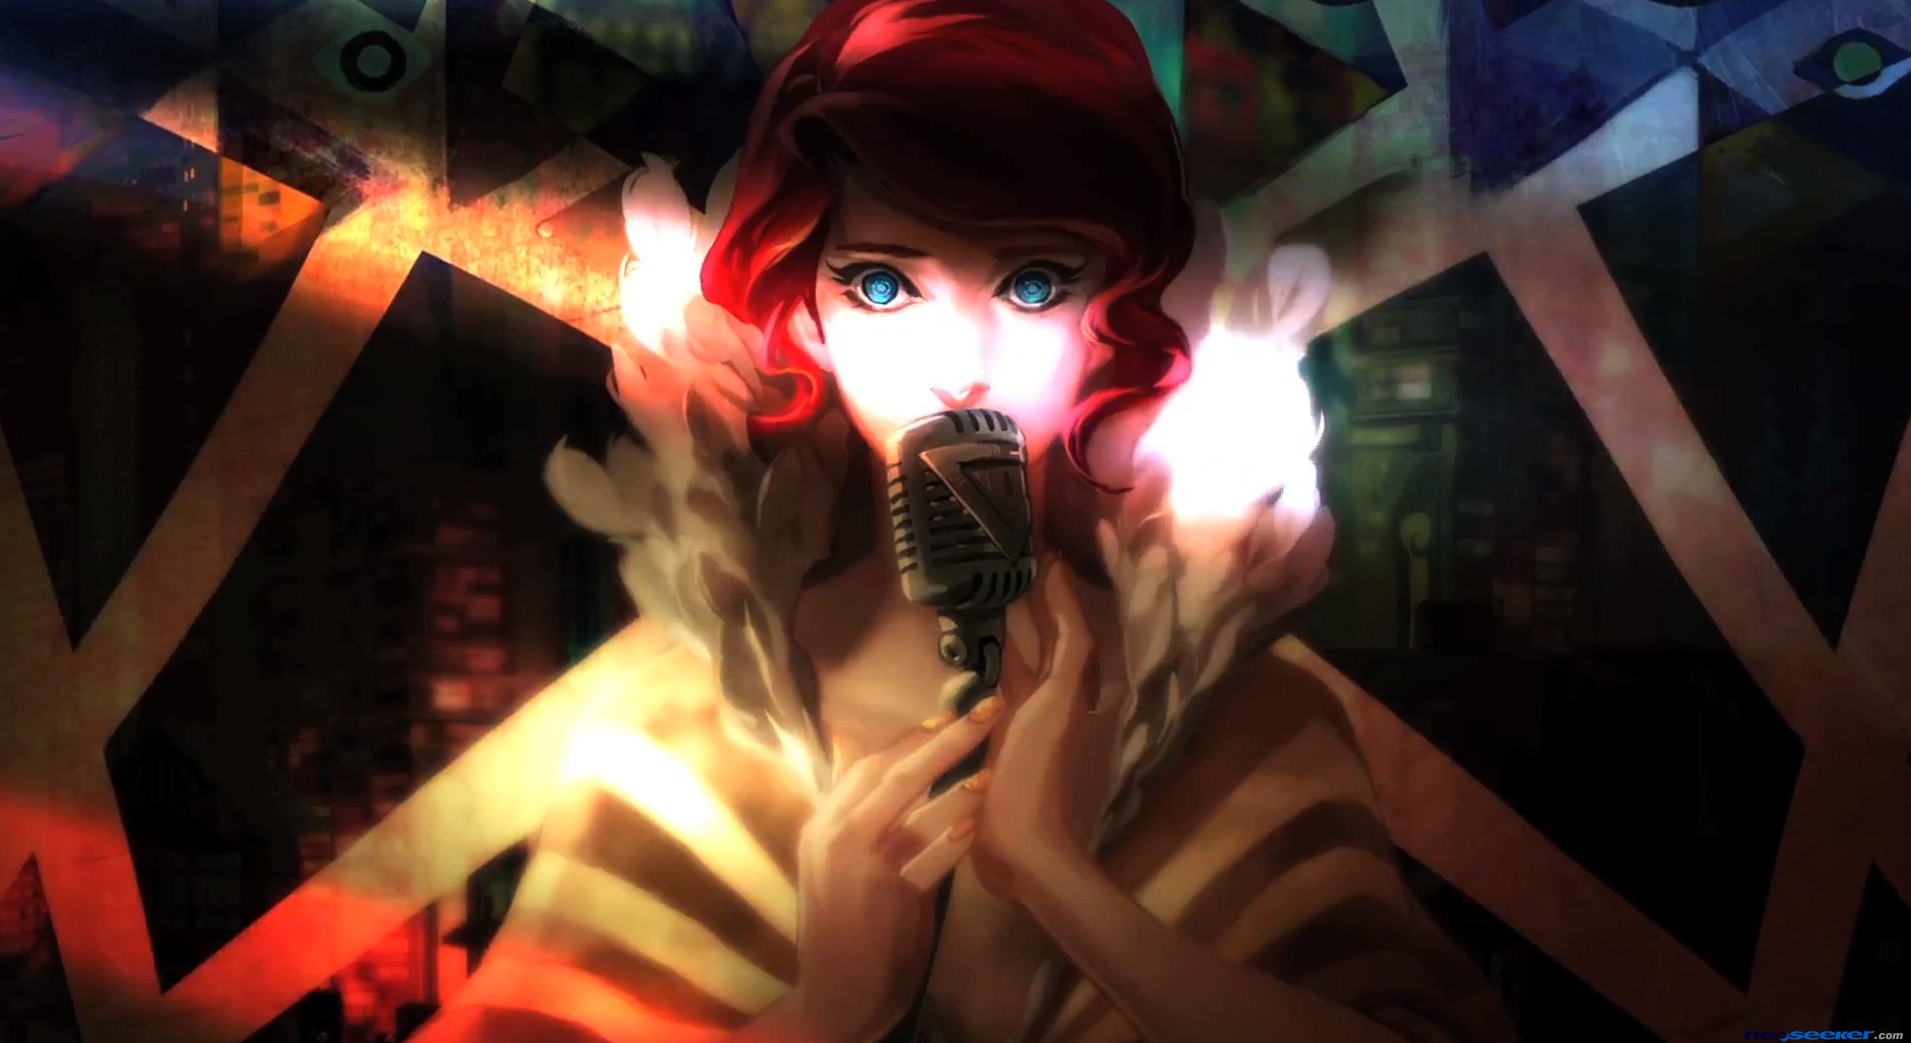 HD desktop wallpaper featuring a stylized image of a red-haired character from the game Transistor, singing into a microphone with glowing hands.